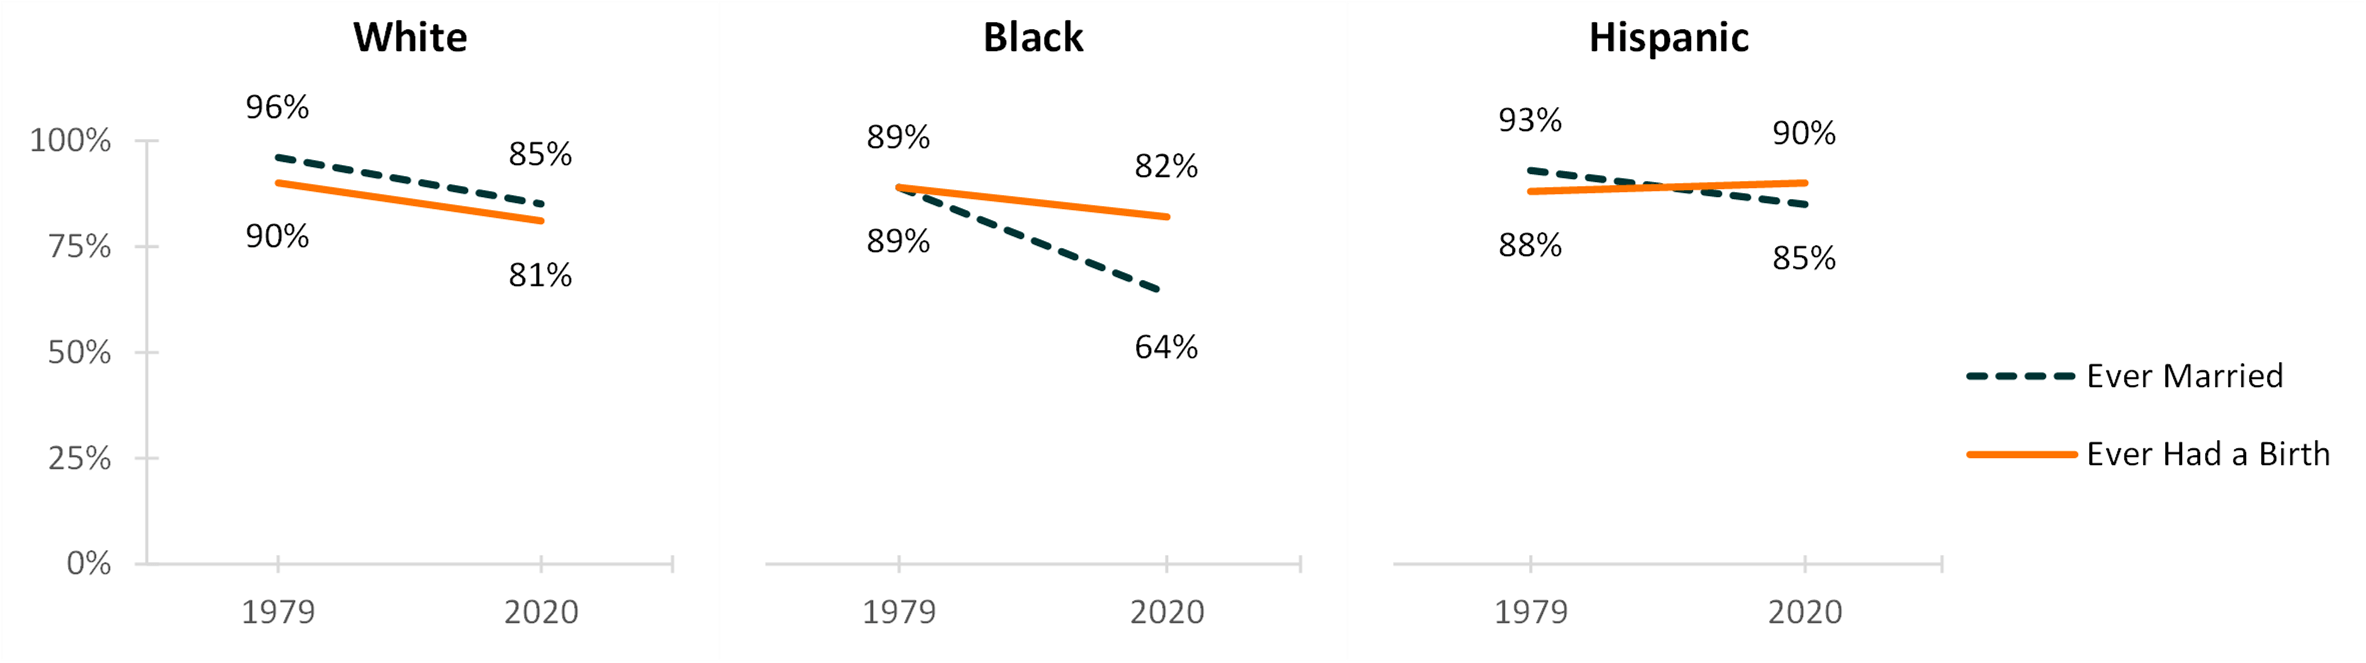 graph showing Figure 2. Shares of Women Aged 40-44 Who Ever Married and Had a Birth in 1979 & 2020 by Race/Ethnicity 